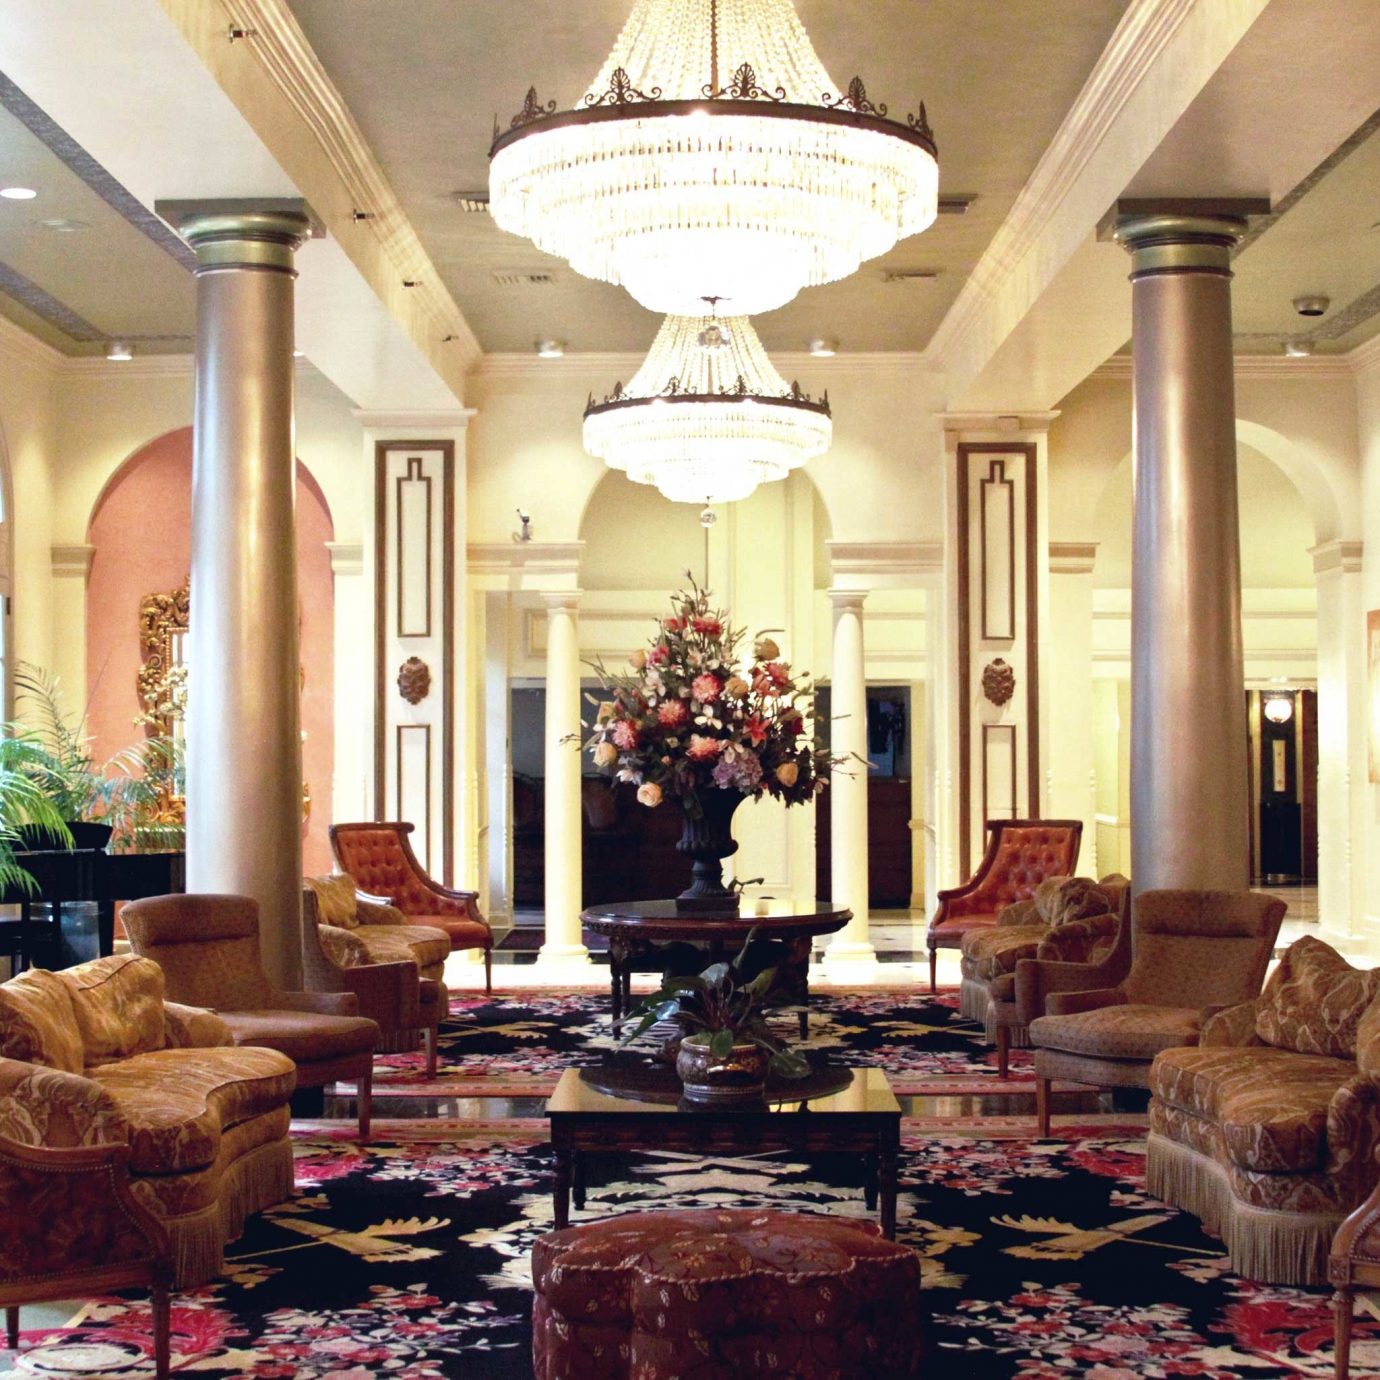 Elegant Hotels Lobby Lounge Luxury living room property home mansion palace